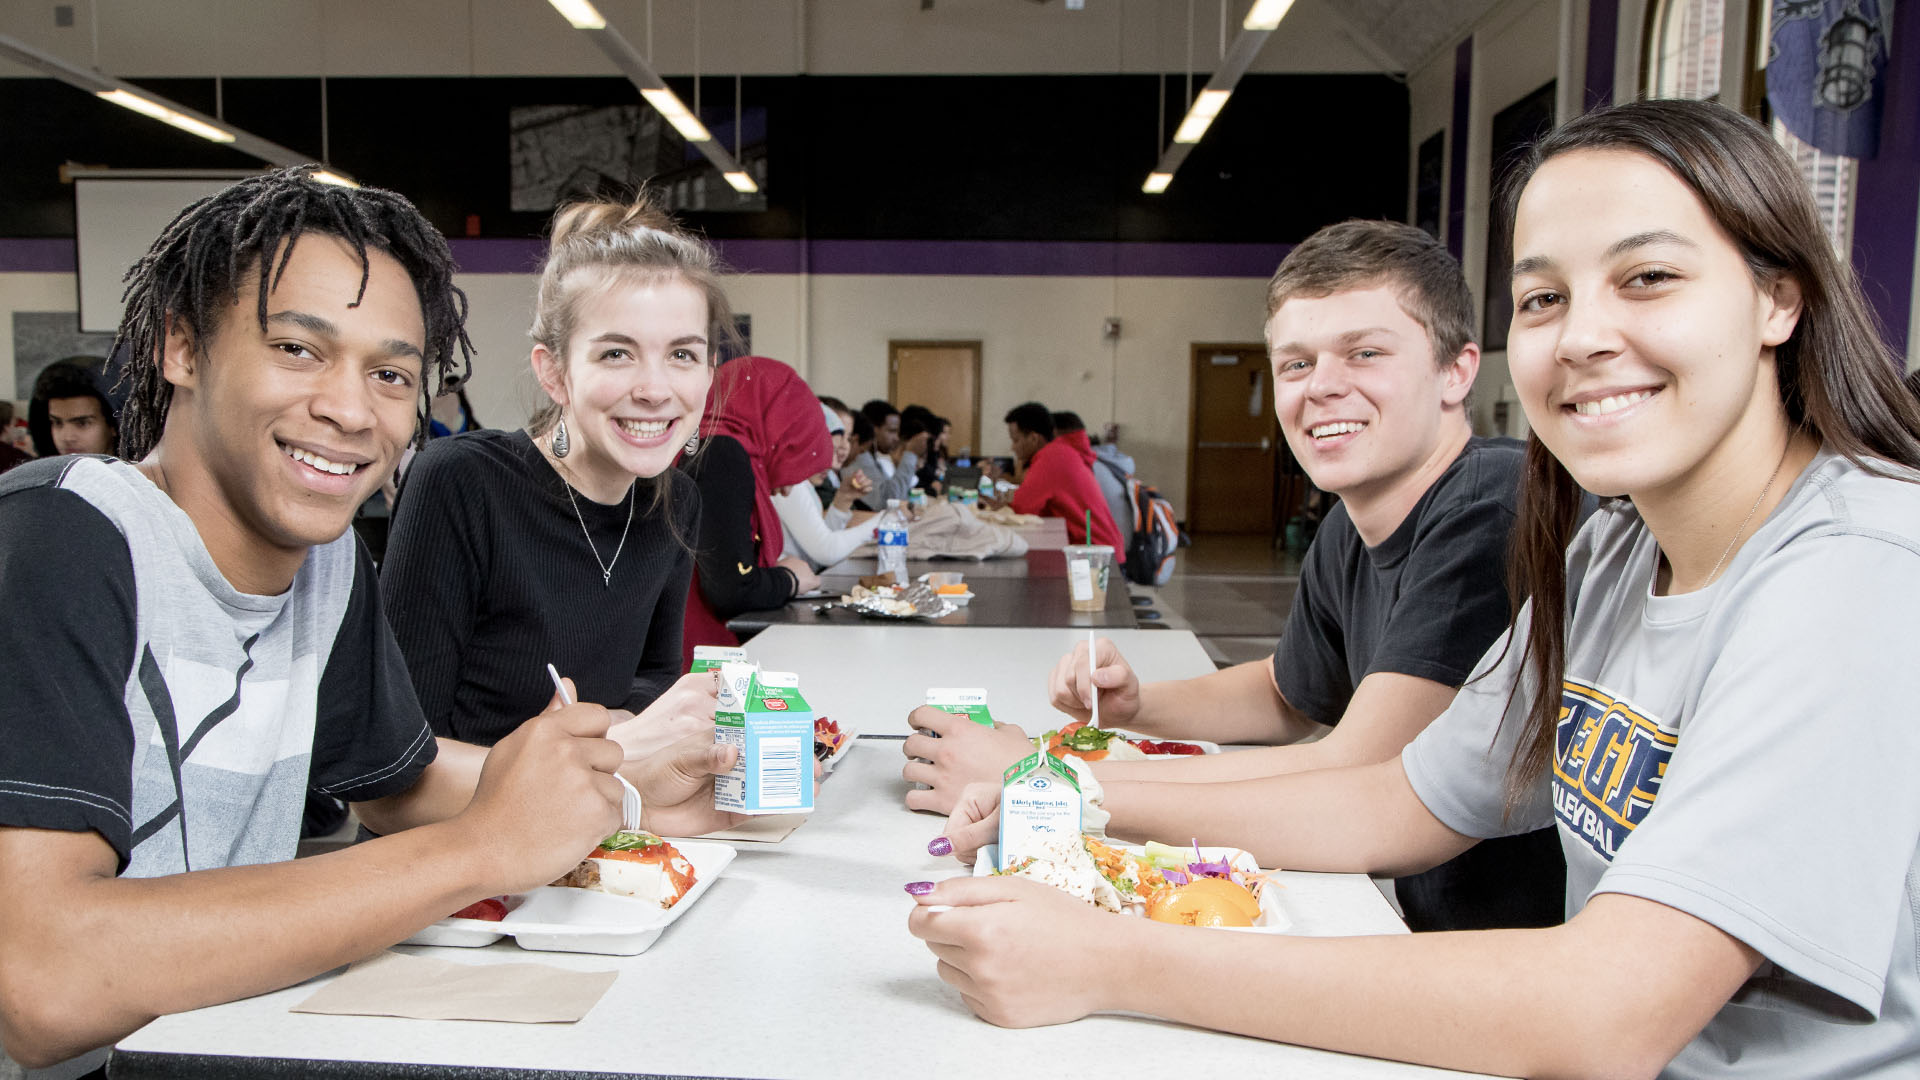 Students in cafeteria eating lunch